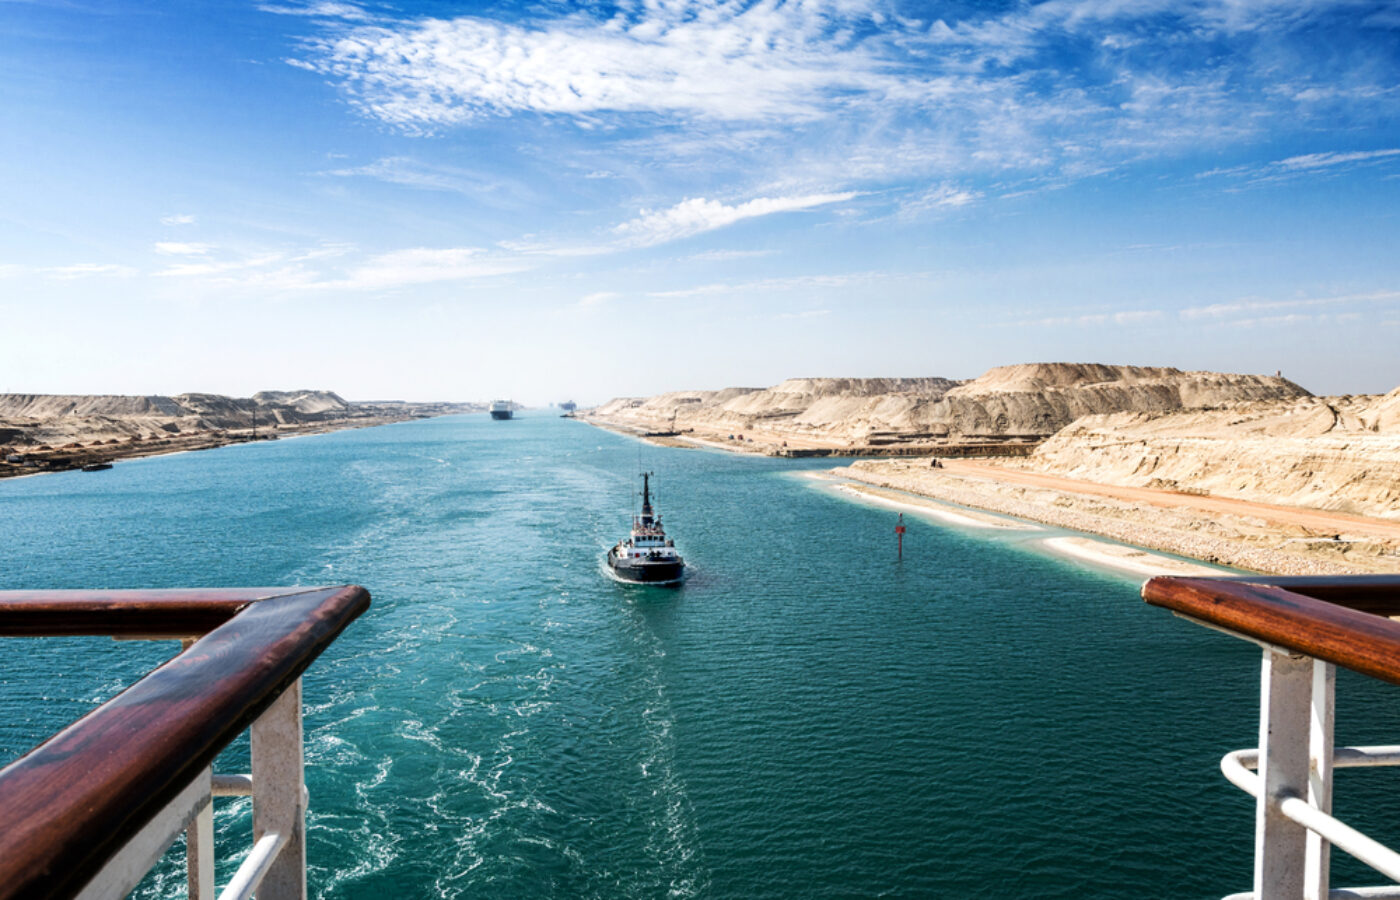 The,Suez,Canal,-,A,Ship,Convoy,With,A,Cruise